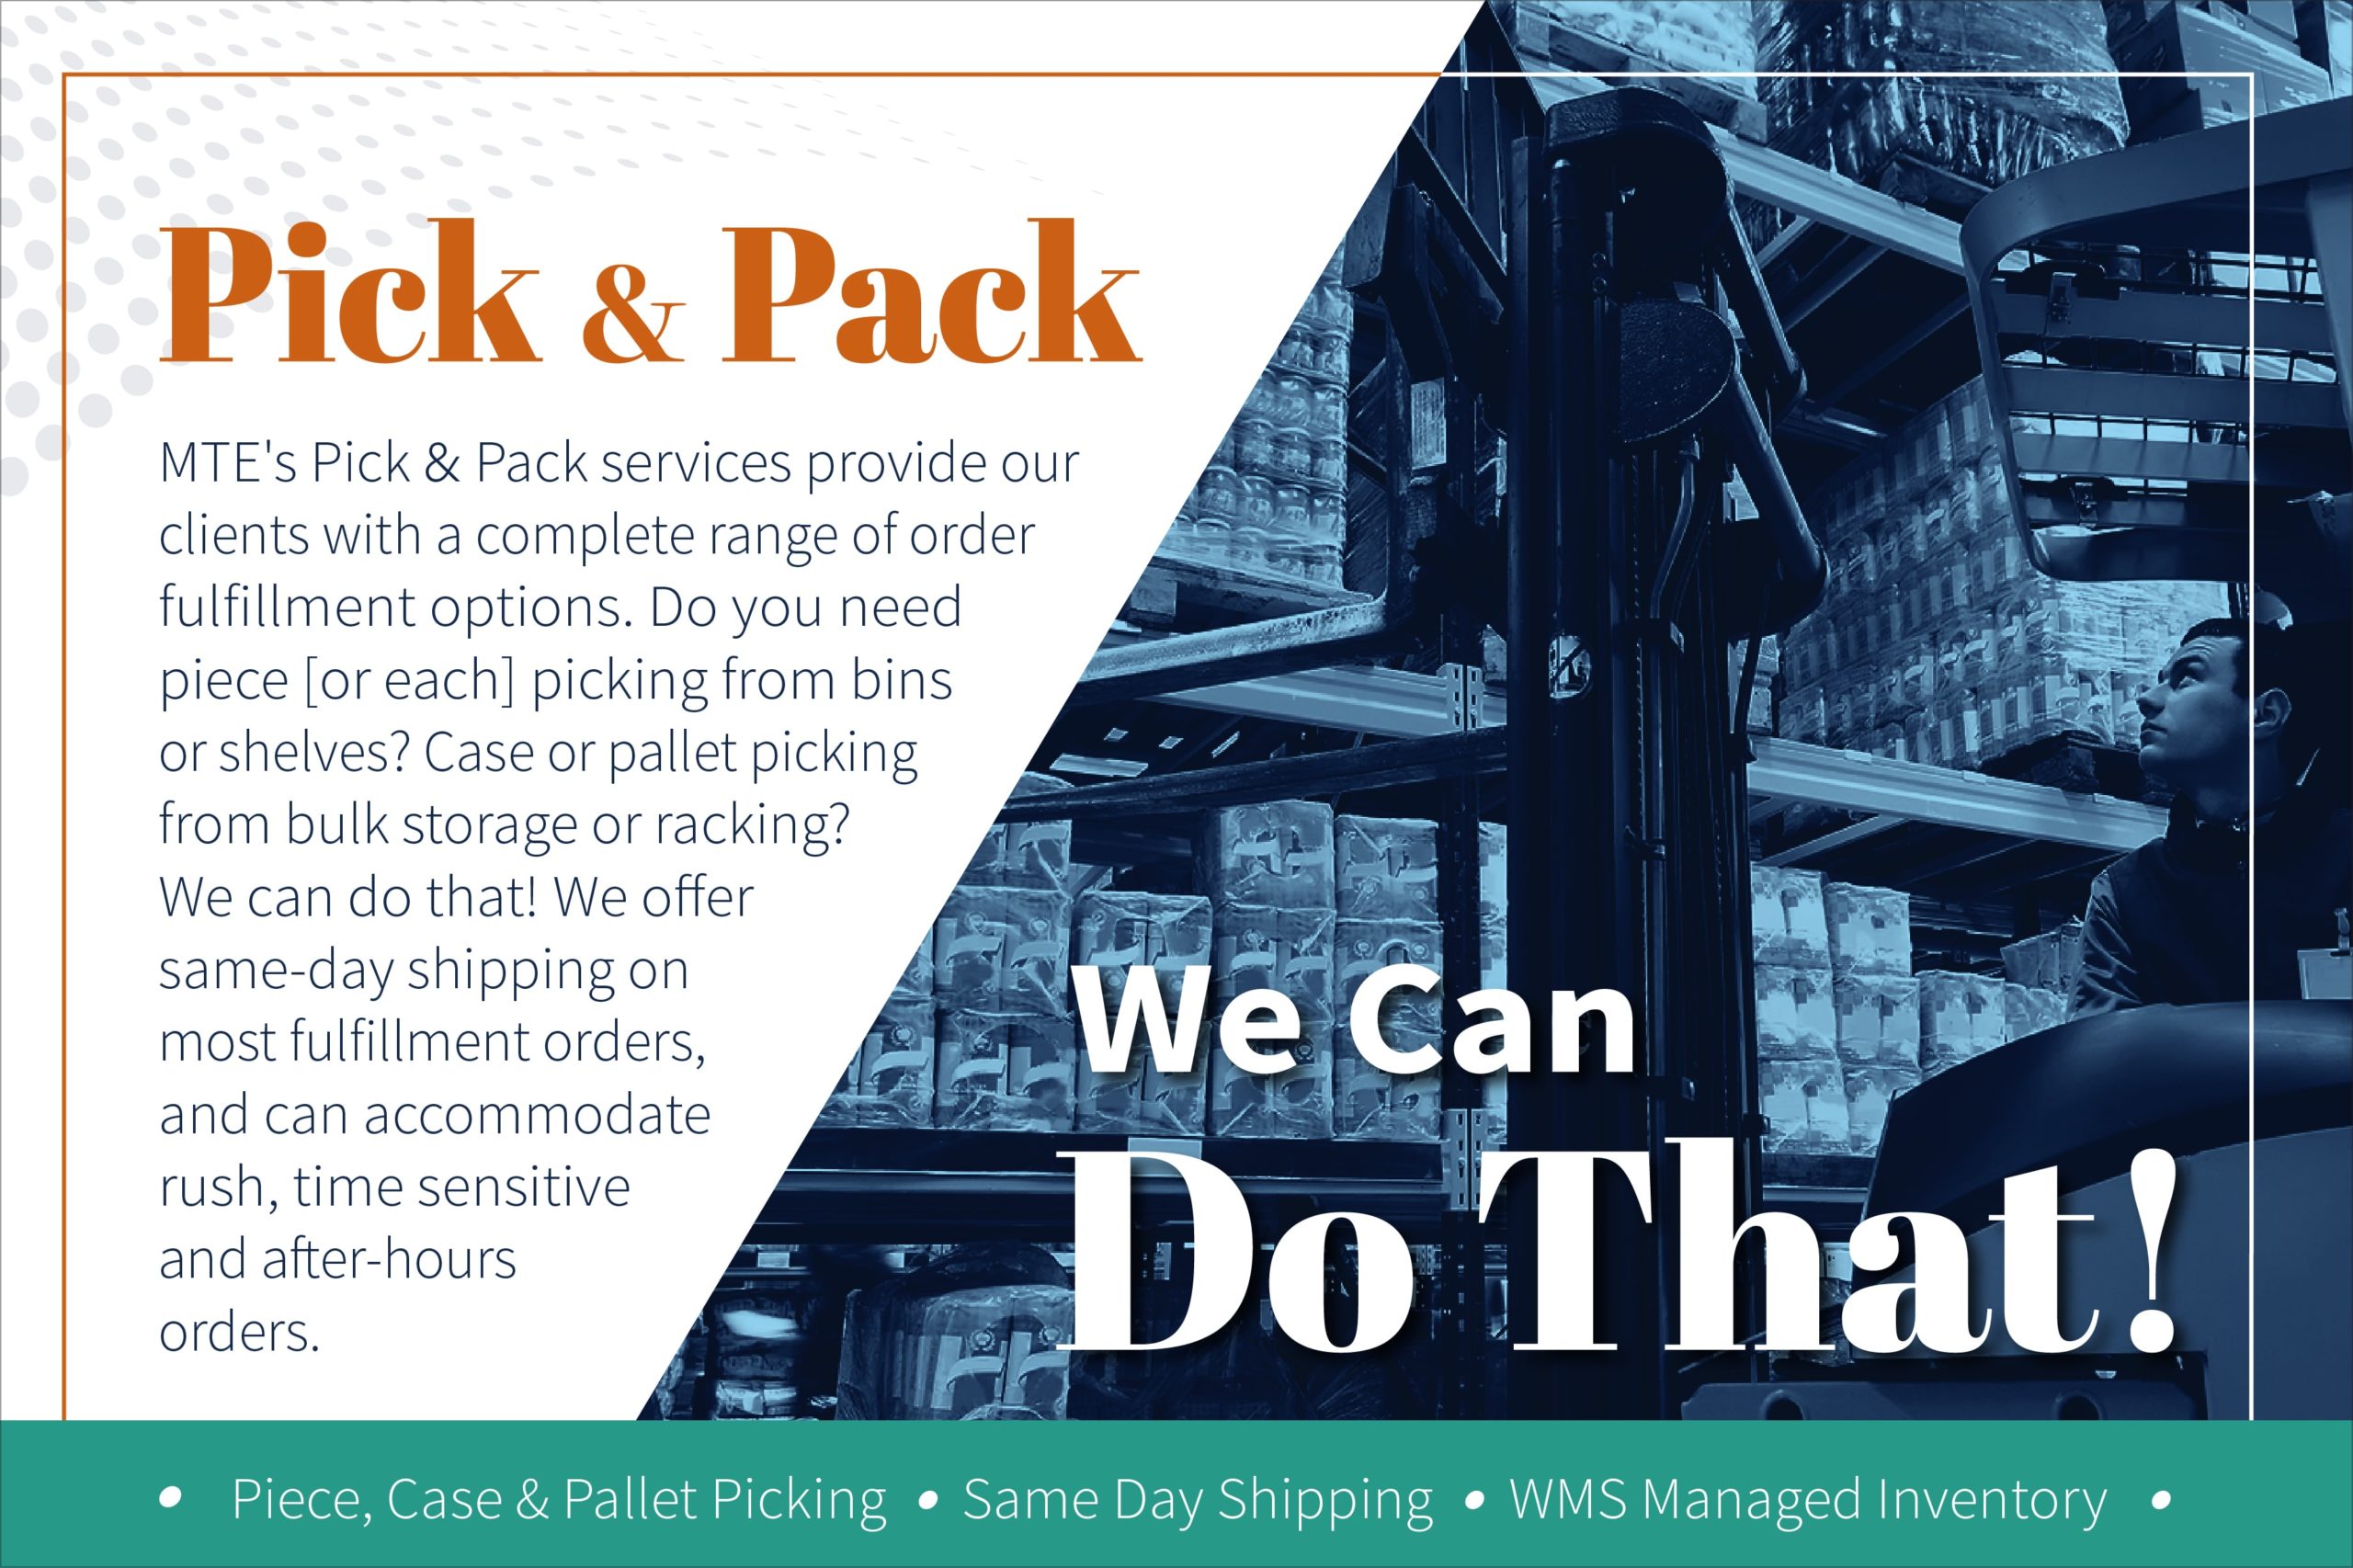 Pick and Pack - We Can Do that!